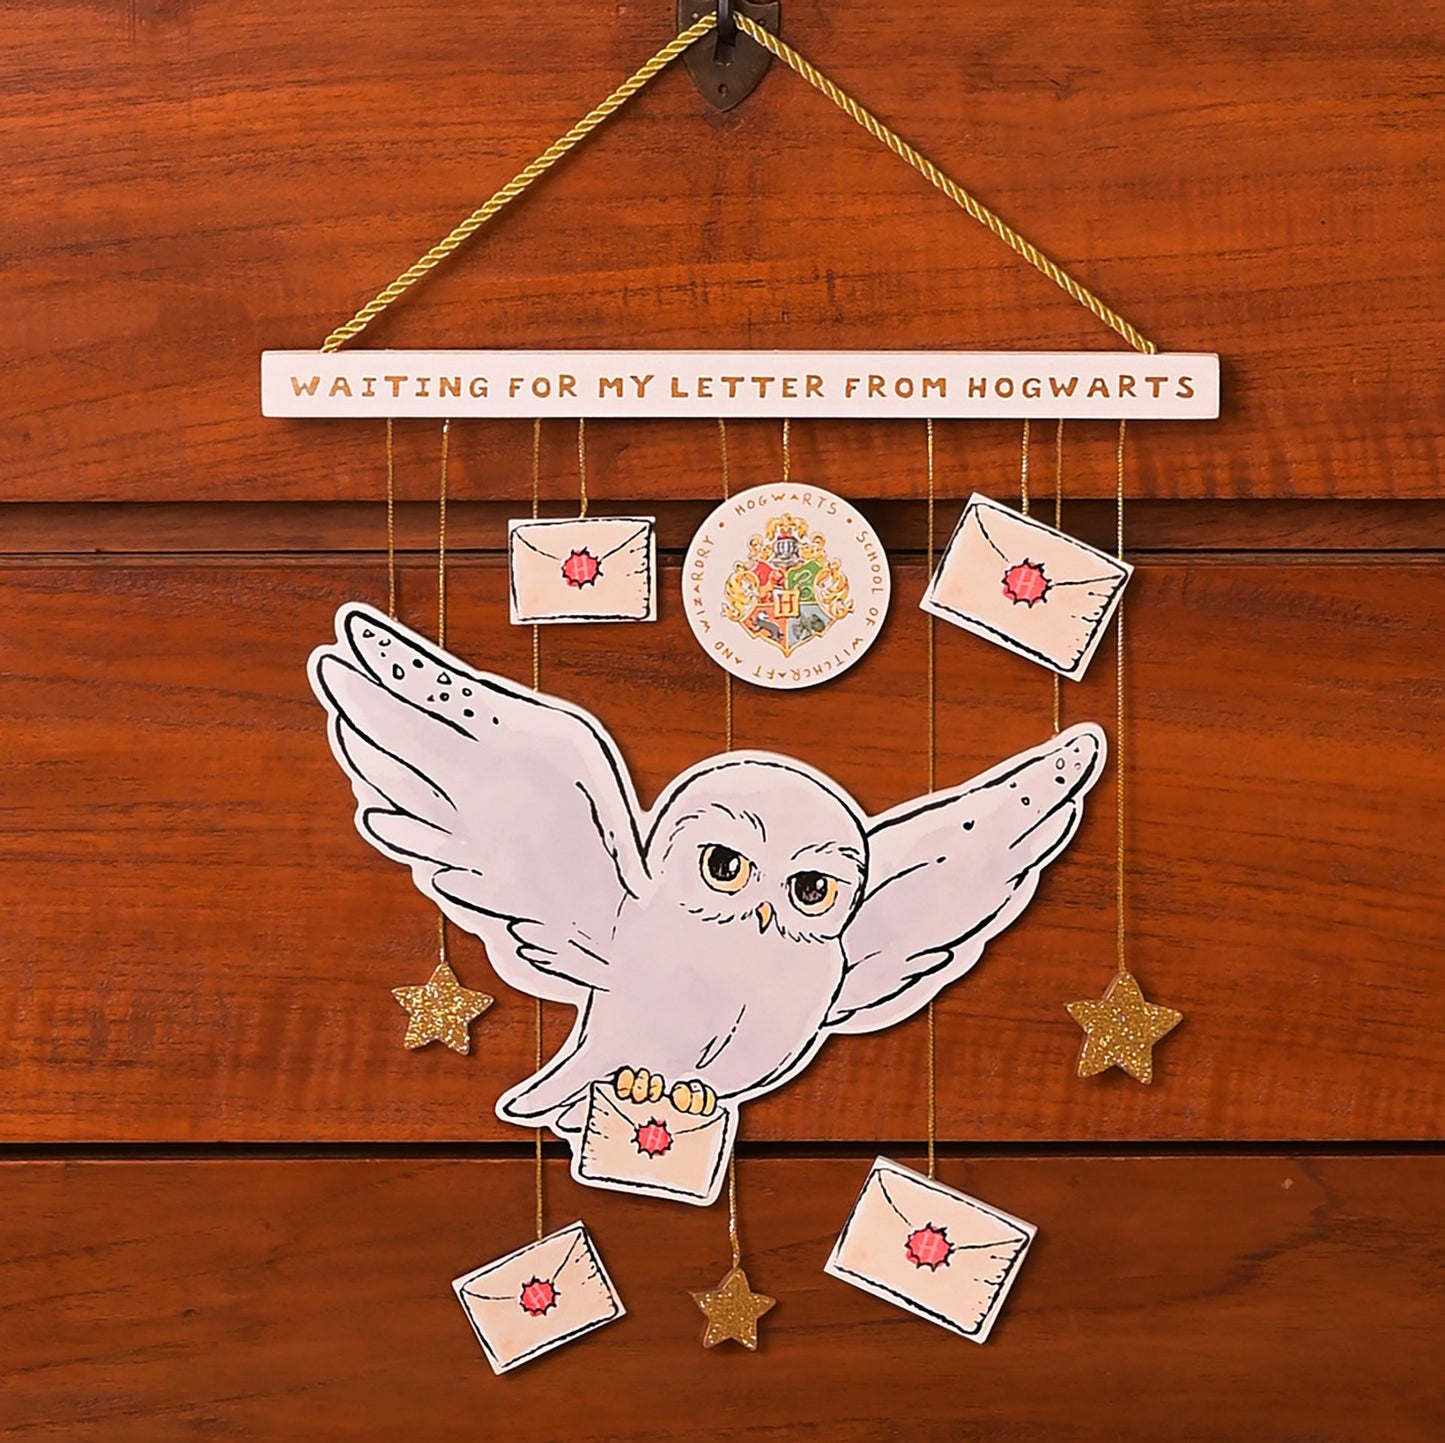 Harry Potter Charms Hedwig Plaque